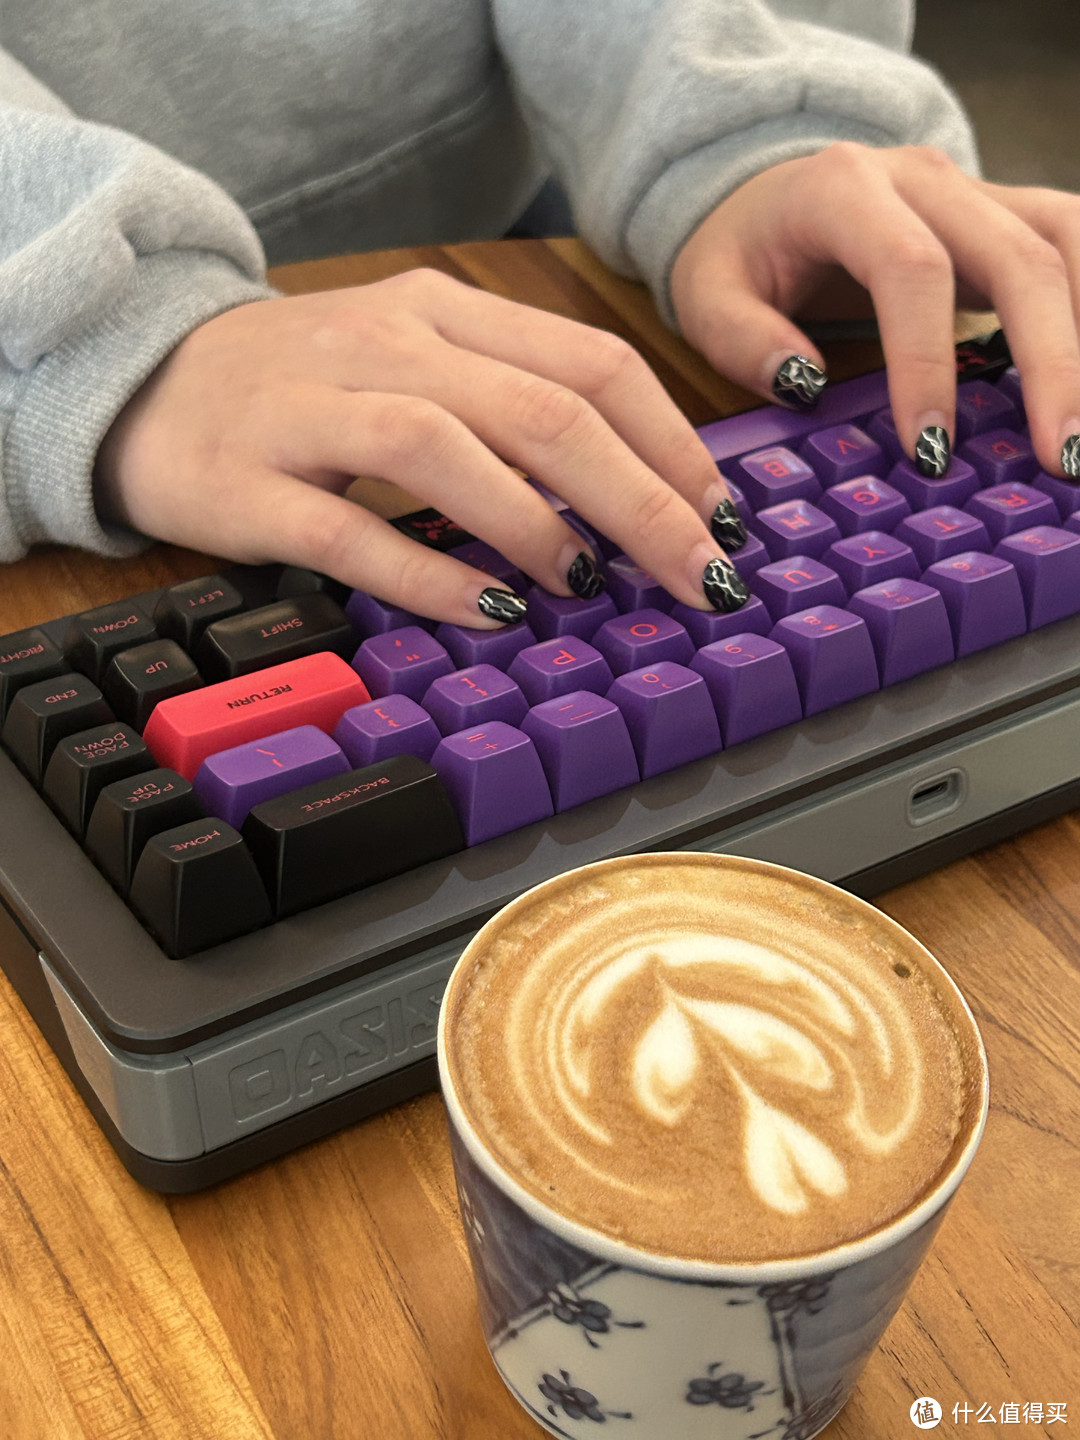 OASIS 65 Mechanical Keyboard at the Café